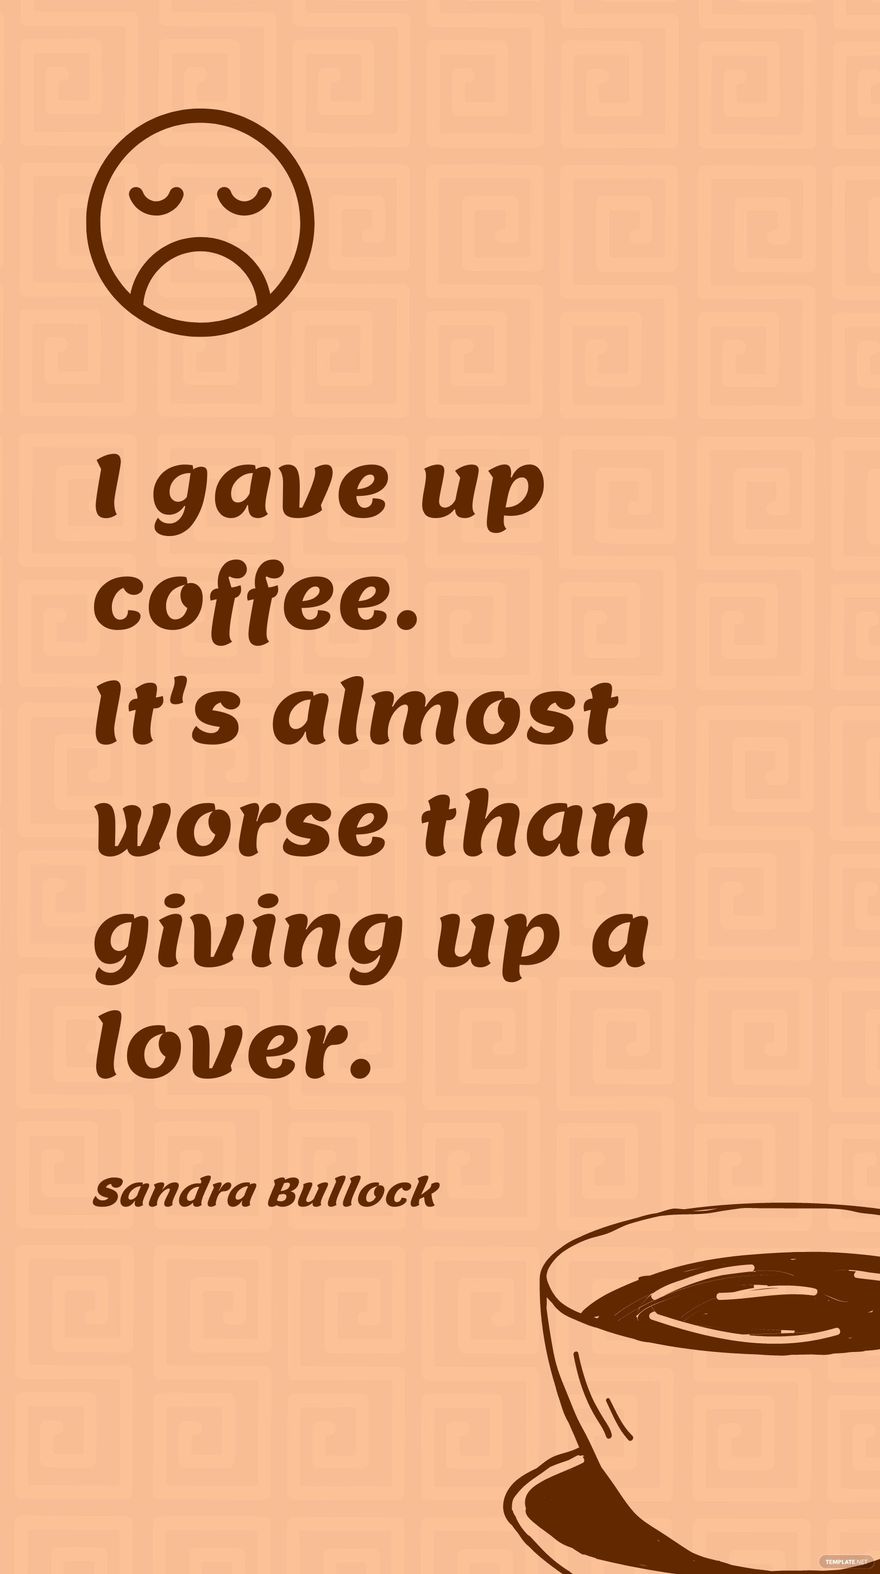 Sandra Bullock - I gave up coffee. It's almost worse than giving up a lover.